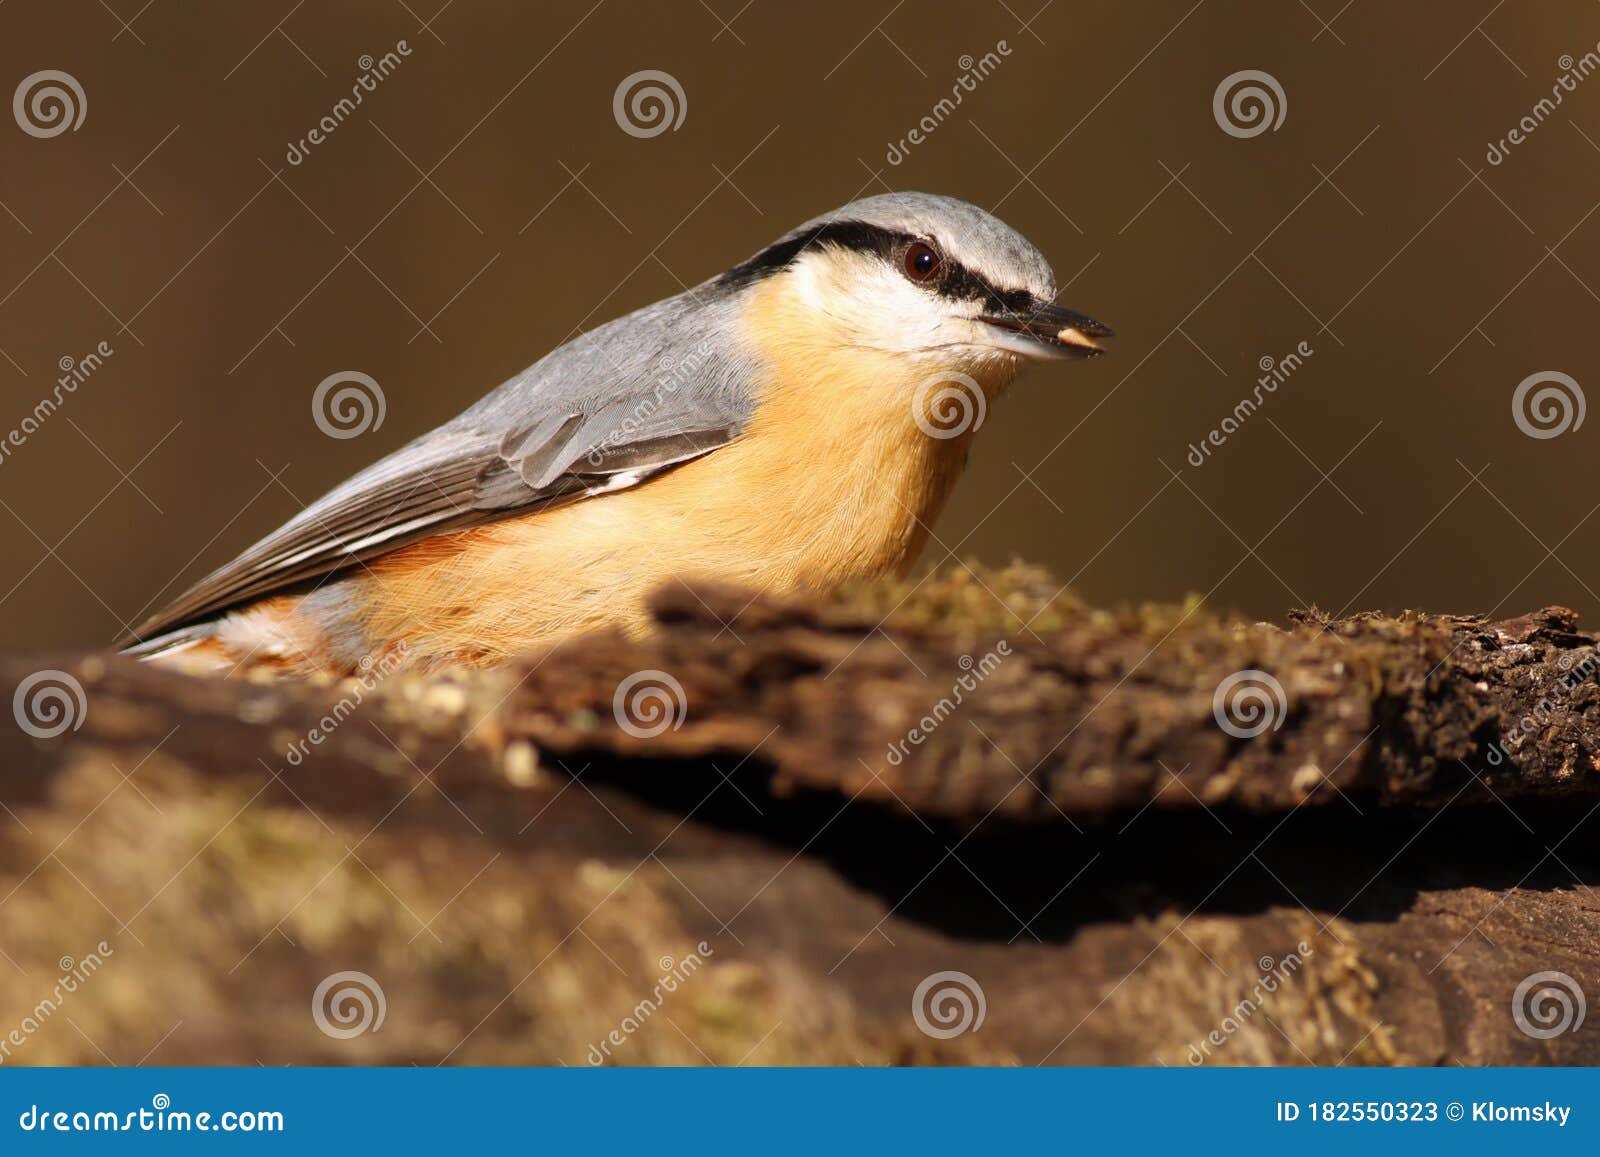 the eurasian nuthatch or wood nuthatch sitta europaea sitting on the treetrunk